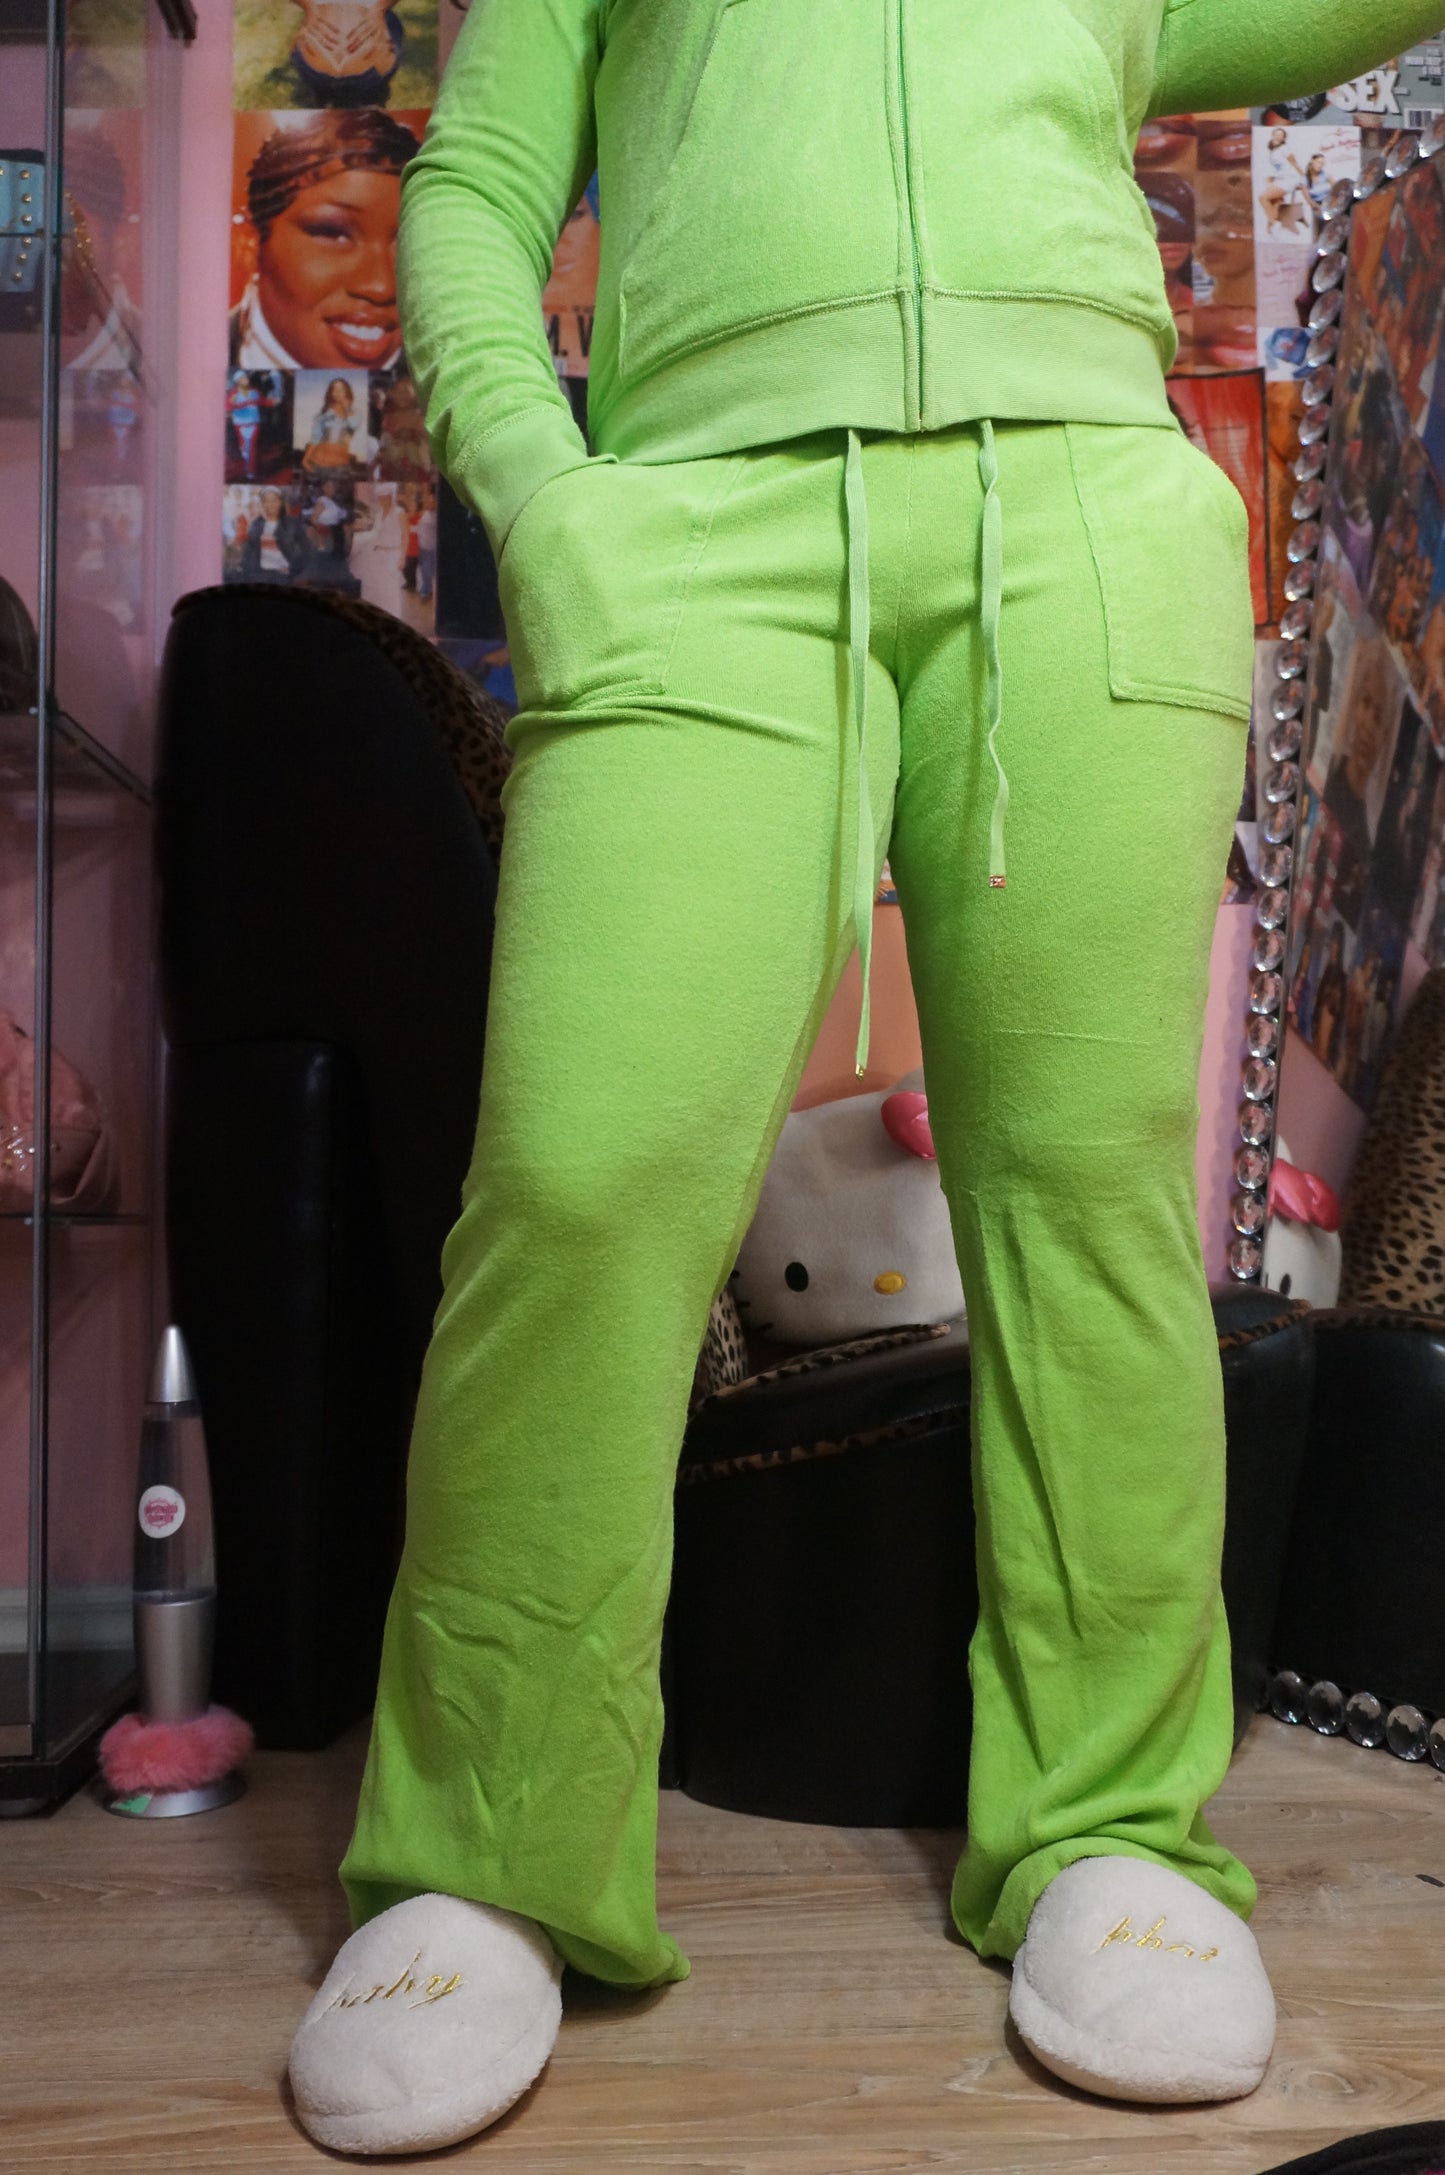 Green Apple Terry Cloth Juicy Couture Tracksuit